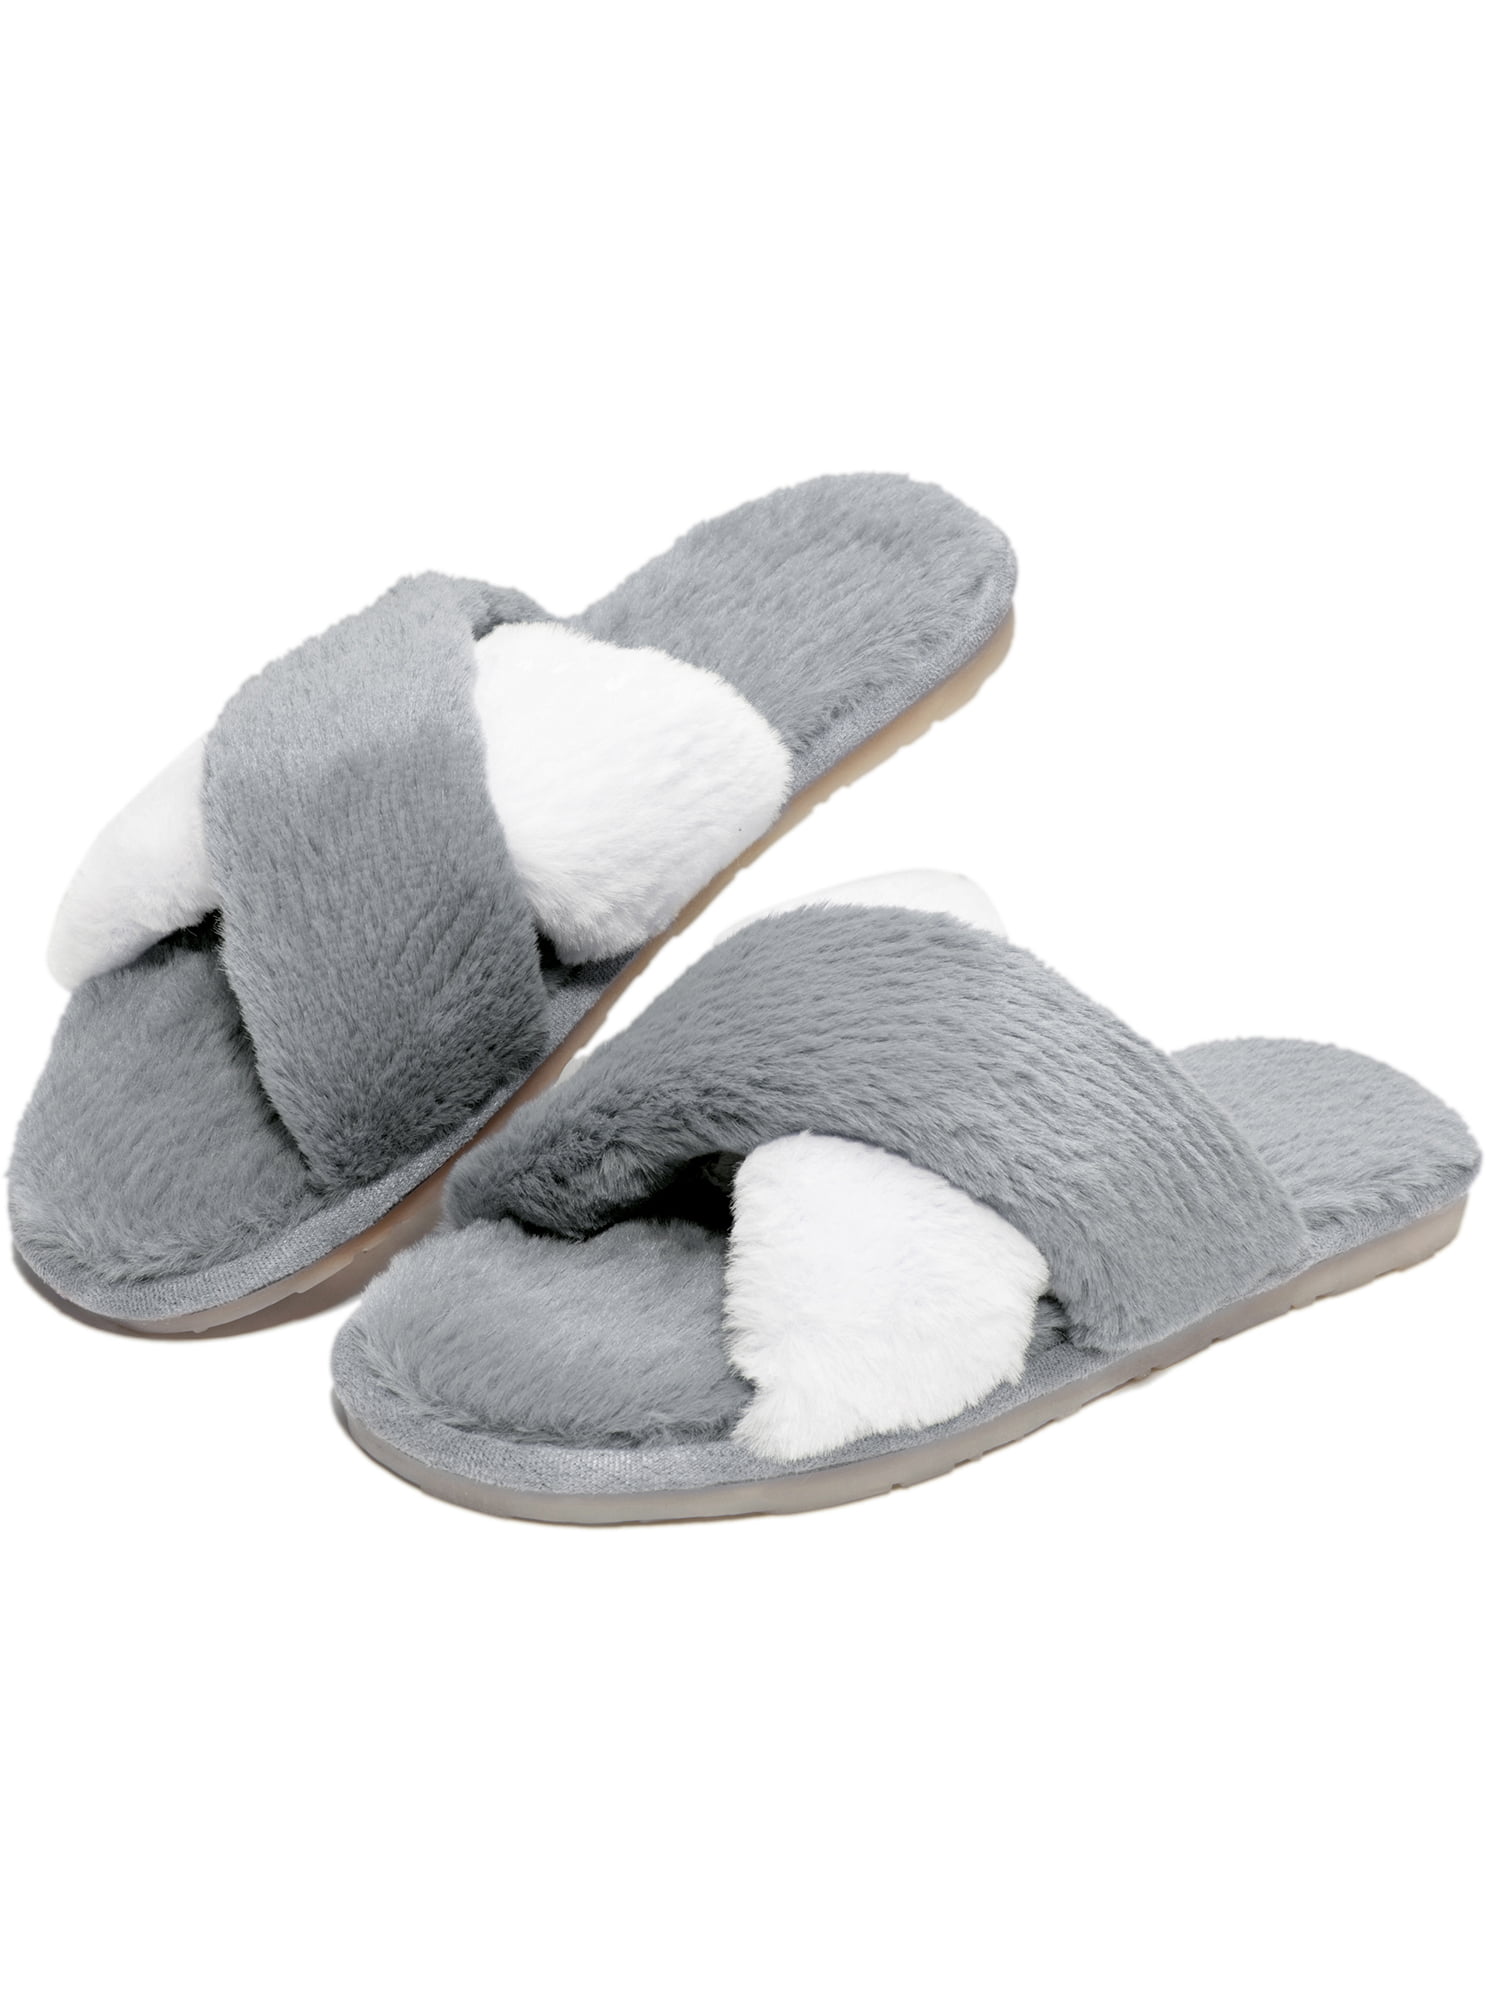 MIYA Ladies' Fluffy Faux Fur Slippers Womens Open Toe Slip On Slippers Soft Comfy Crossover Sliders Flat Indoor House Shoes